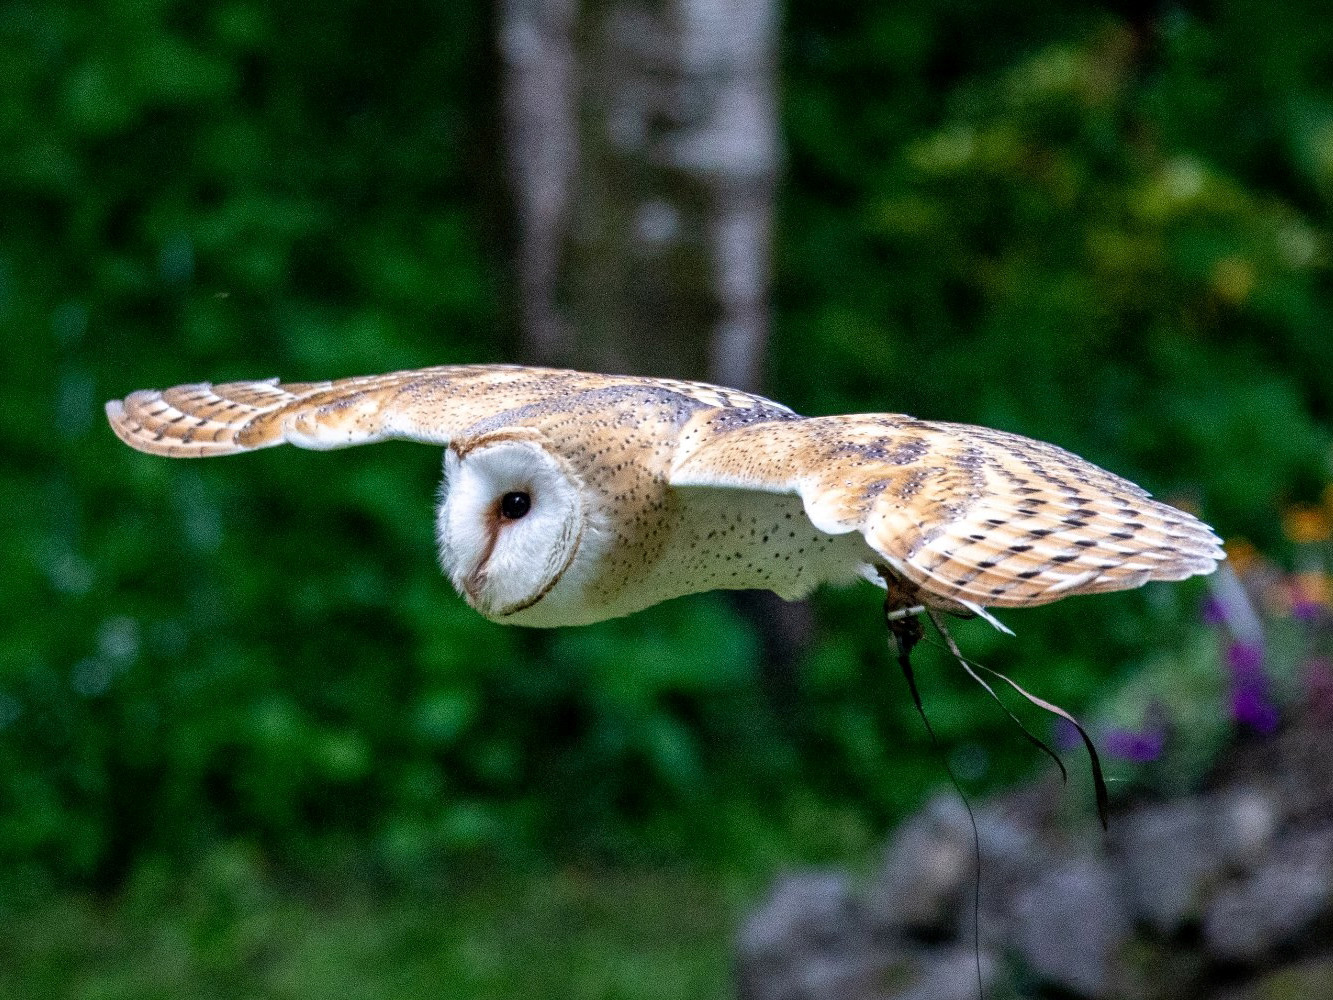 Opening Times & Prices for the National Centre for Birds of Prey